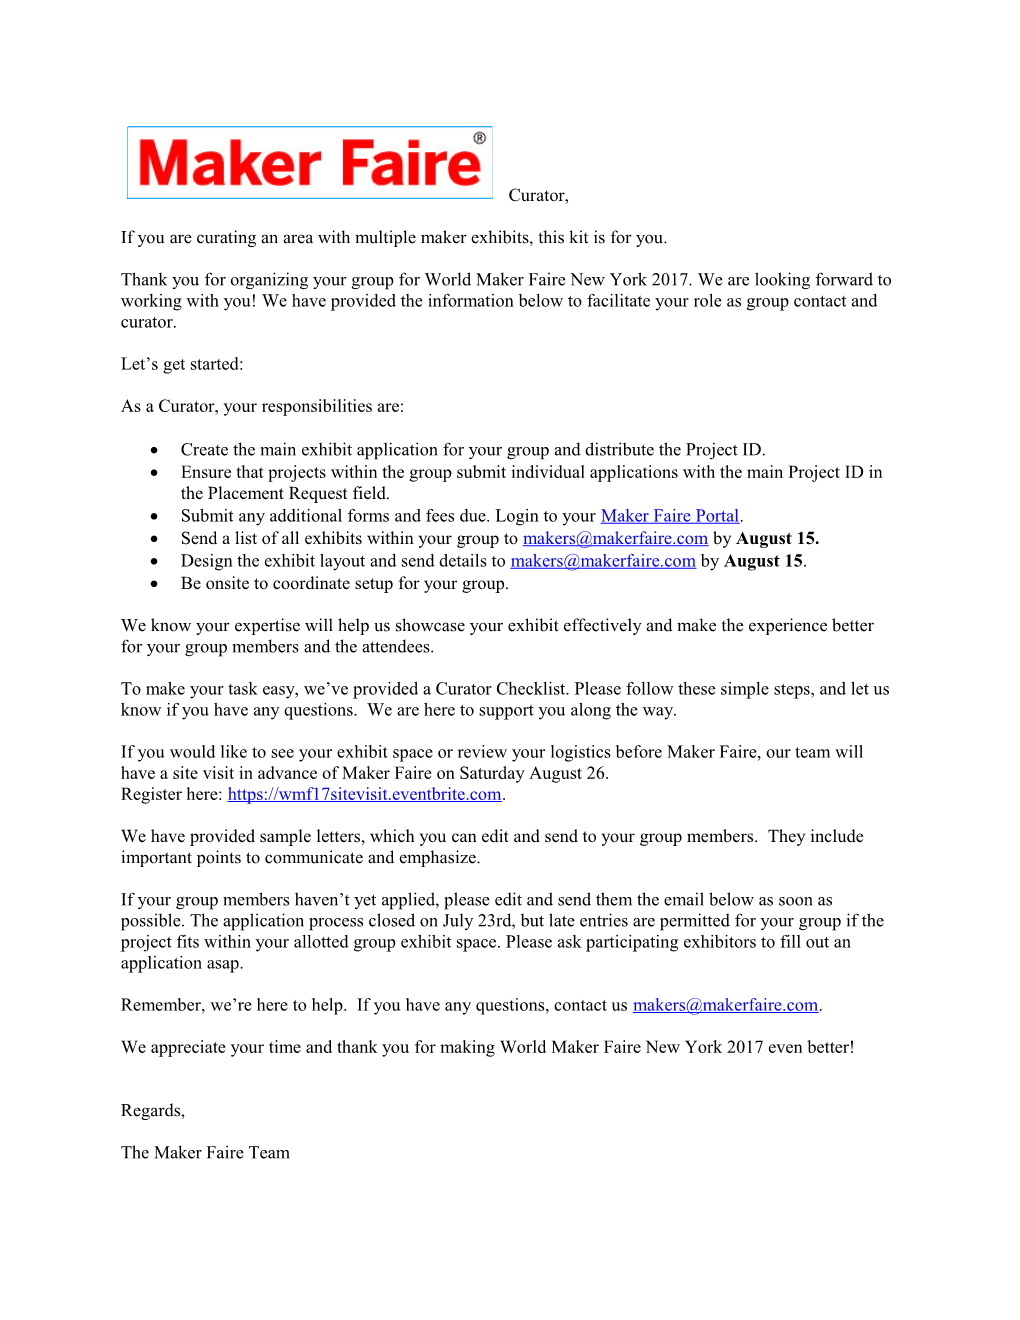 If You Are Curating an Area with Multiple Maker Exhibits, This Kit Is for You